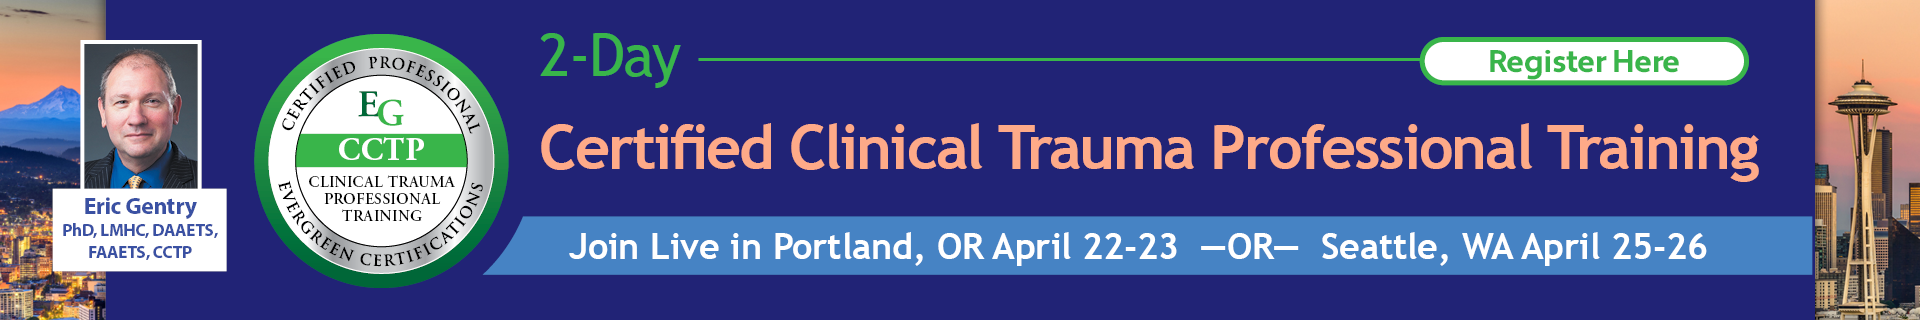 2-Day Certified Clinical Trauma Professional Training